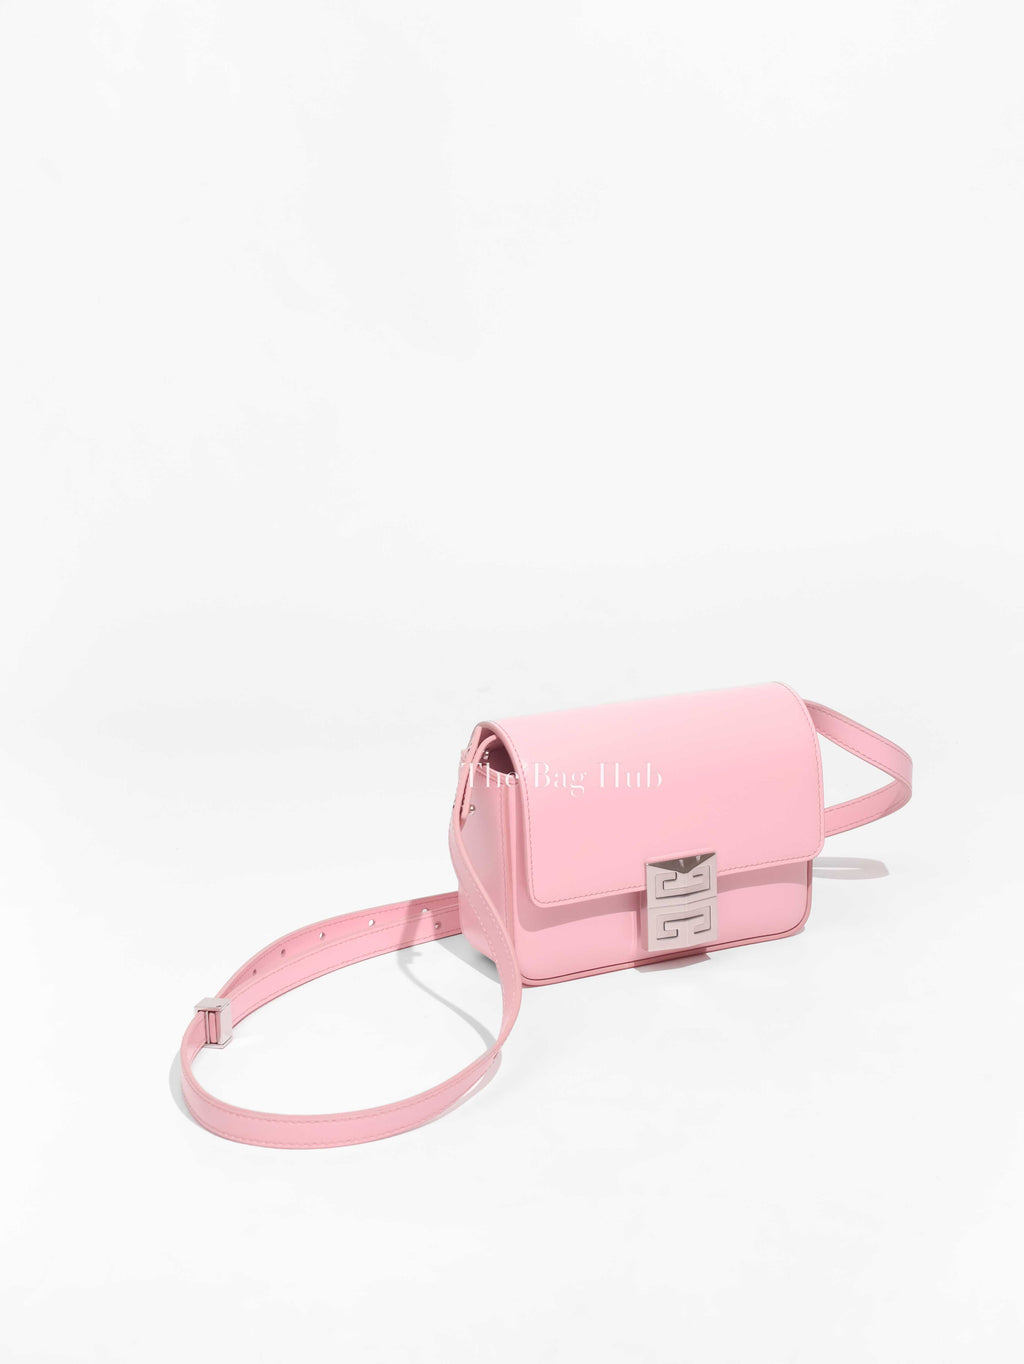 Givenchy Bright Pink Calf Leather 4G Small Crossbody Bag